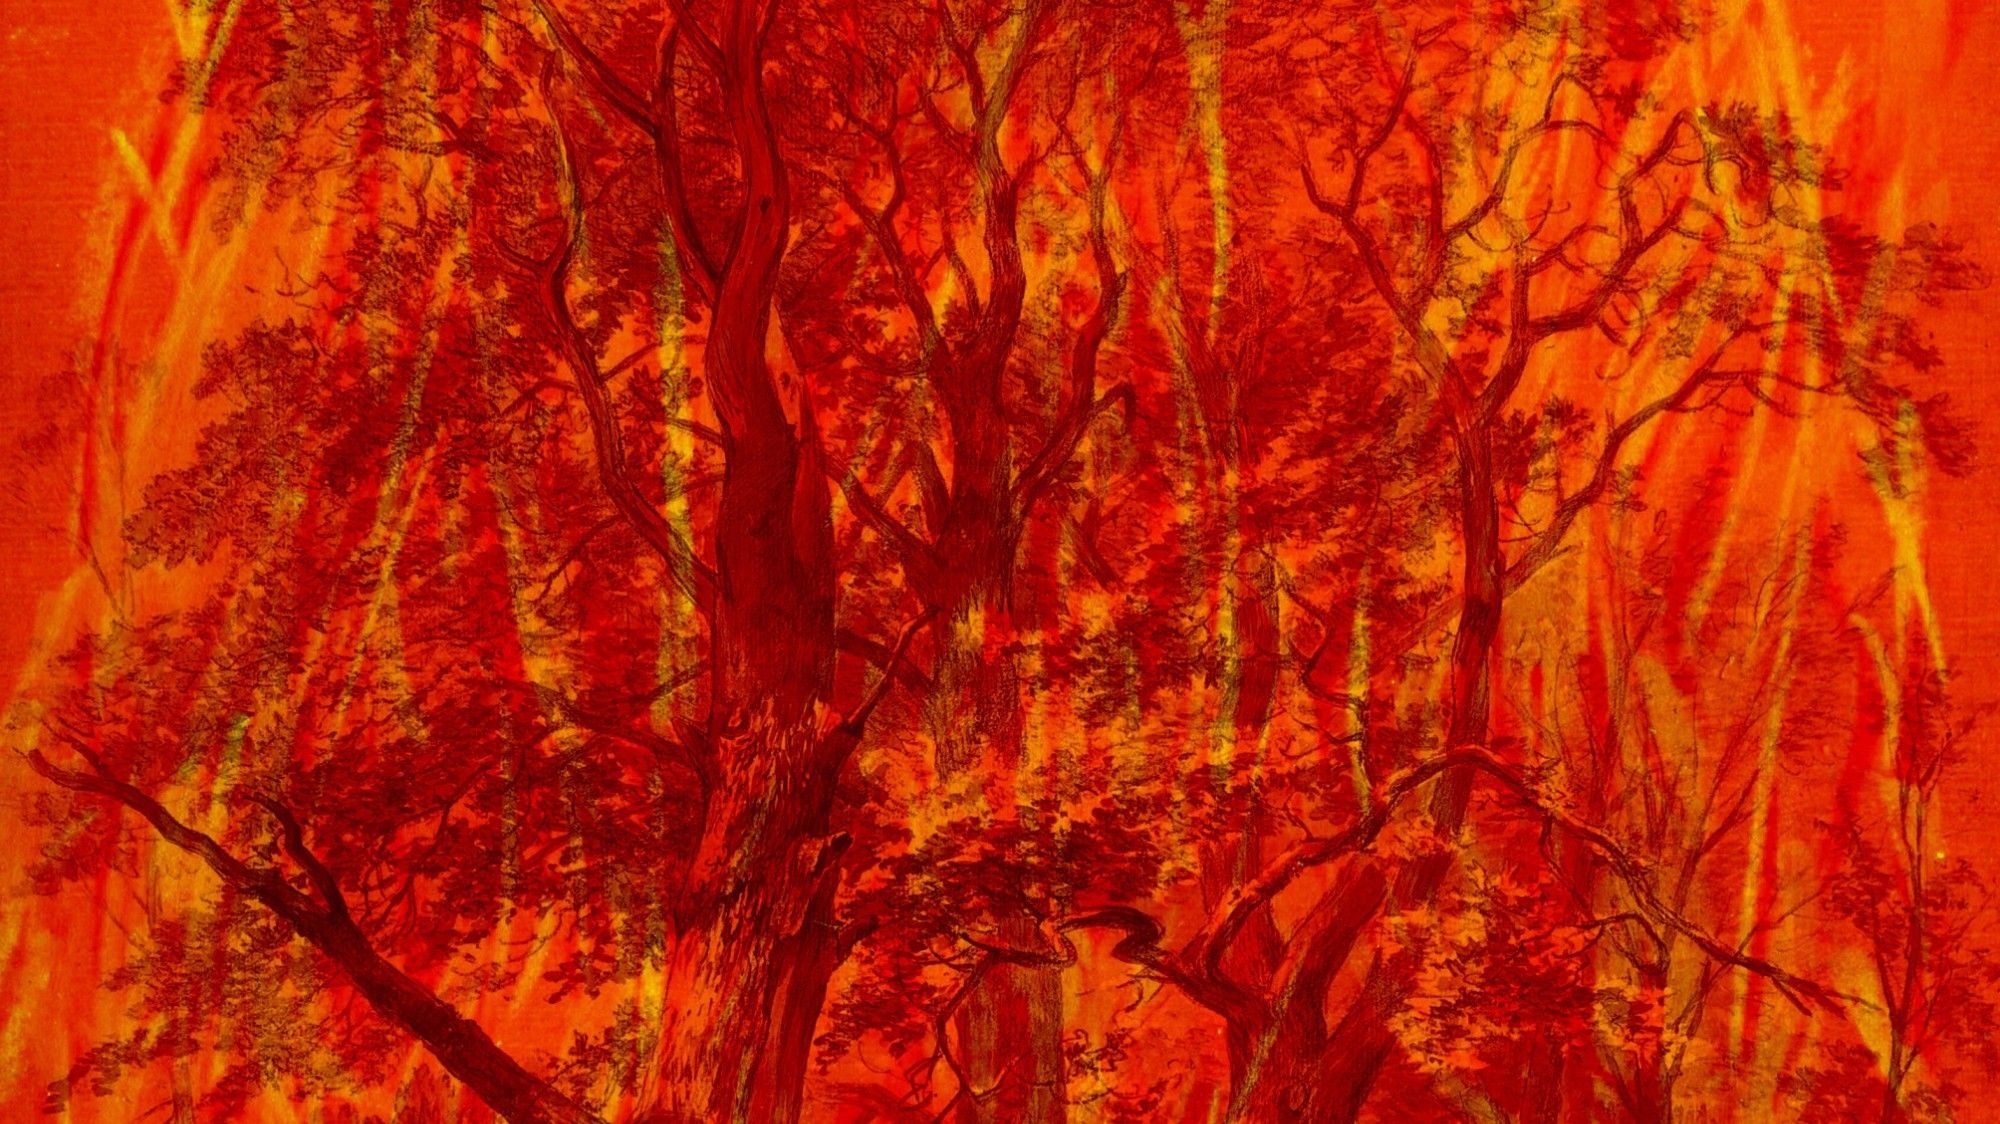 ALKANARA - The Fire and the Forest - ©